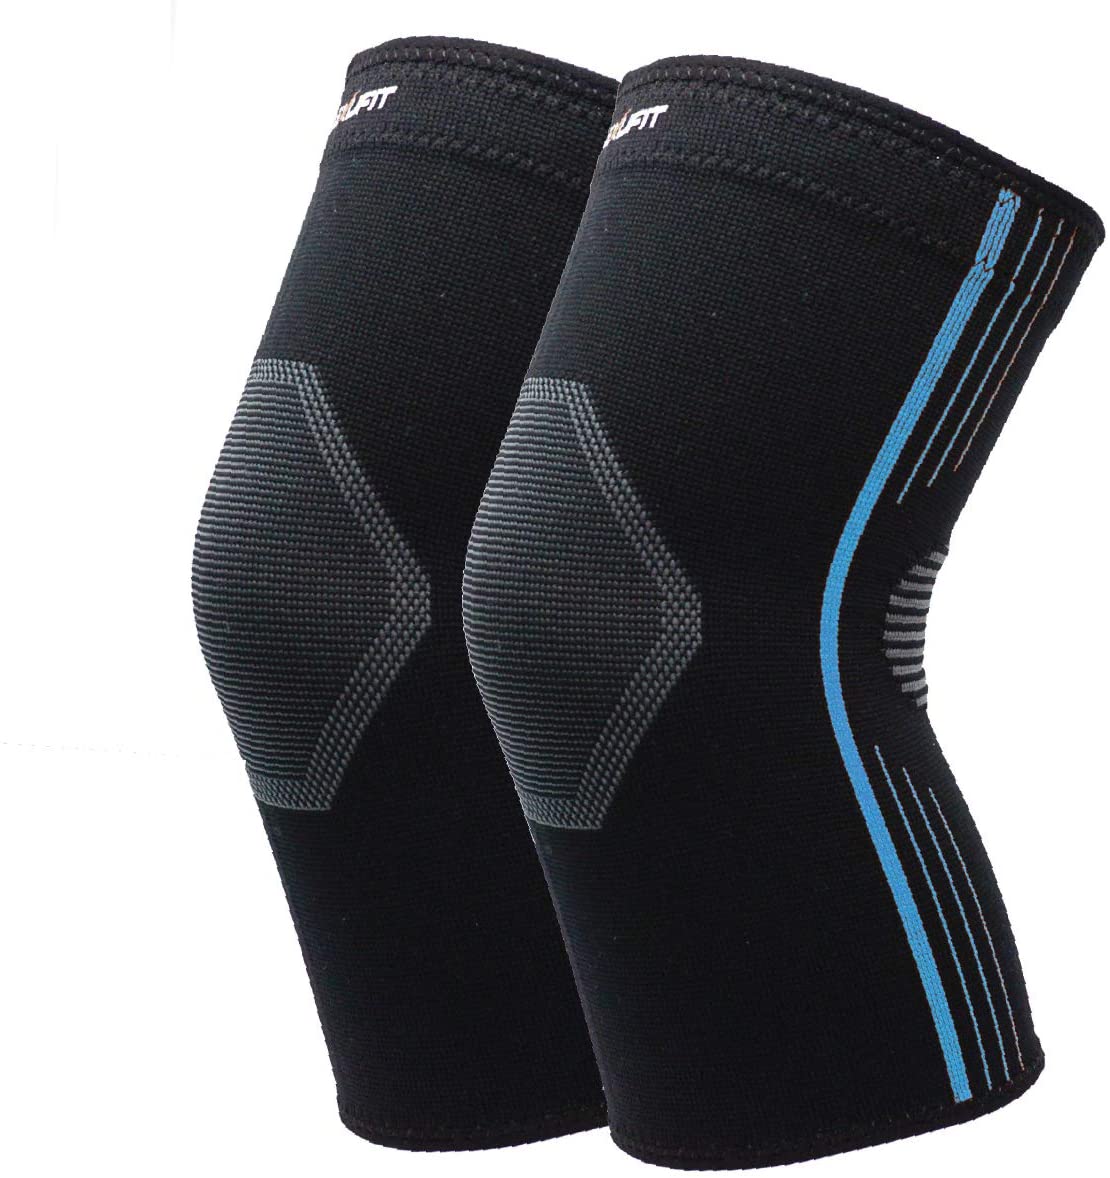 NeoAlly® High Compression Knee Sleeves